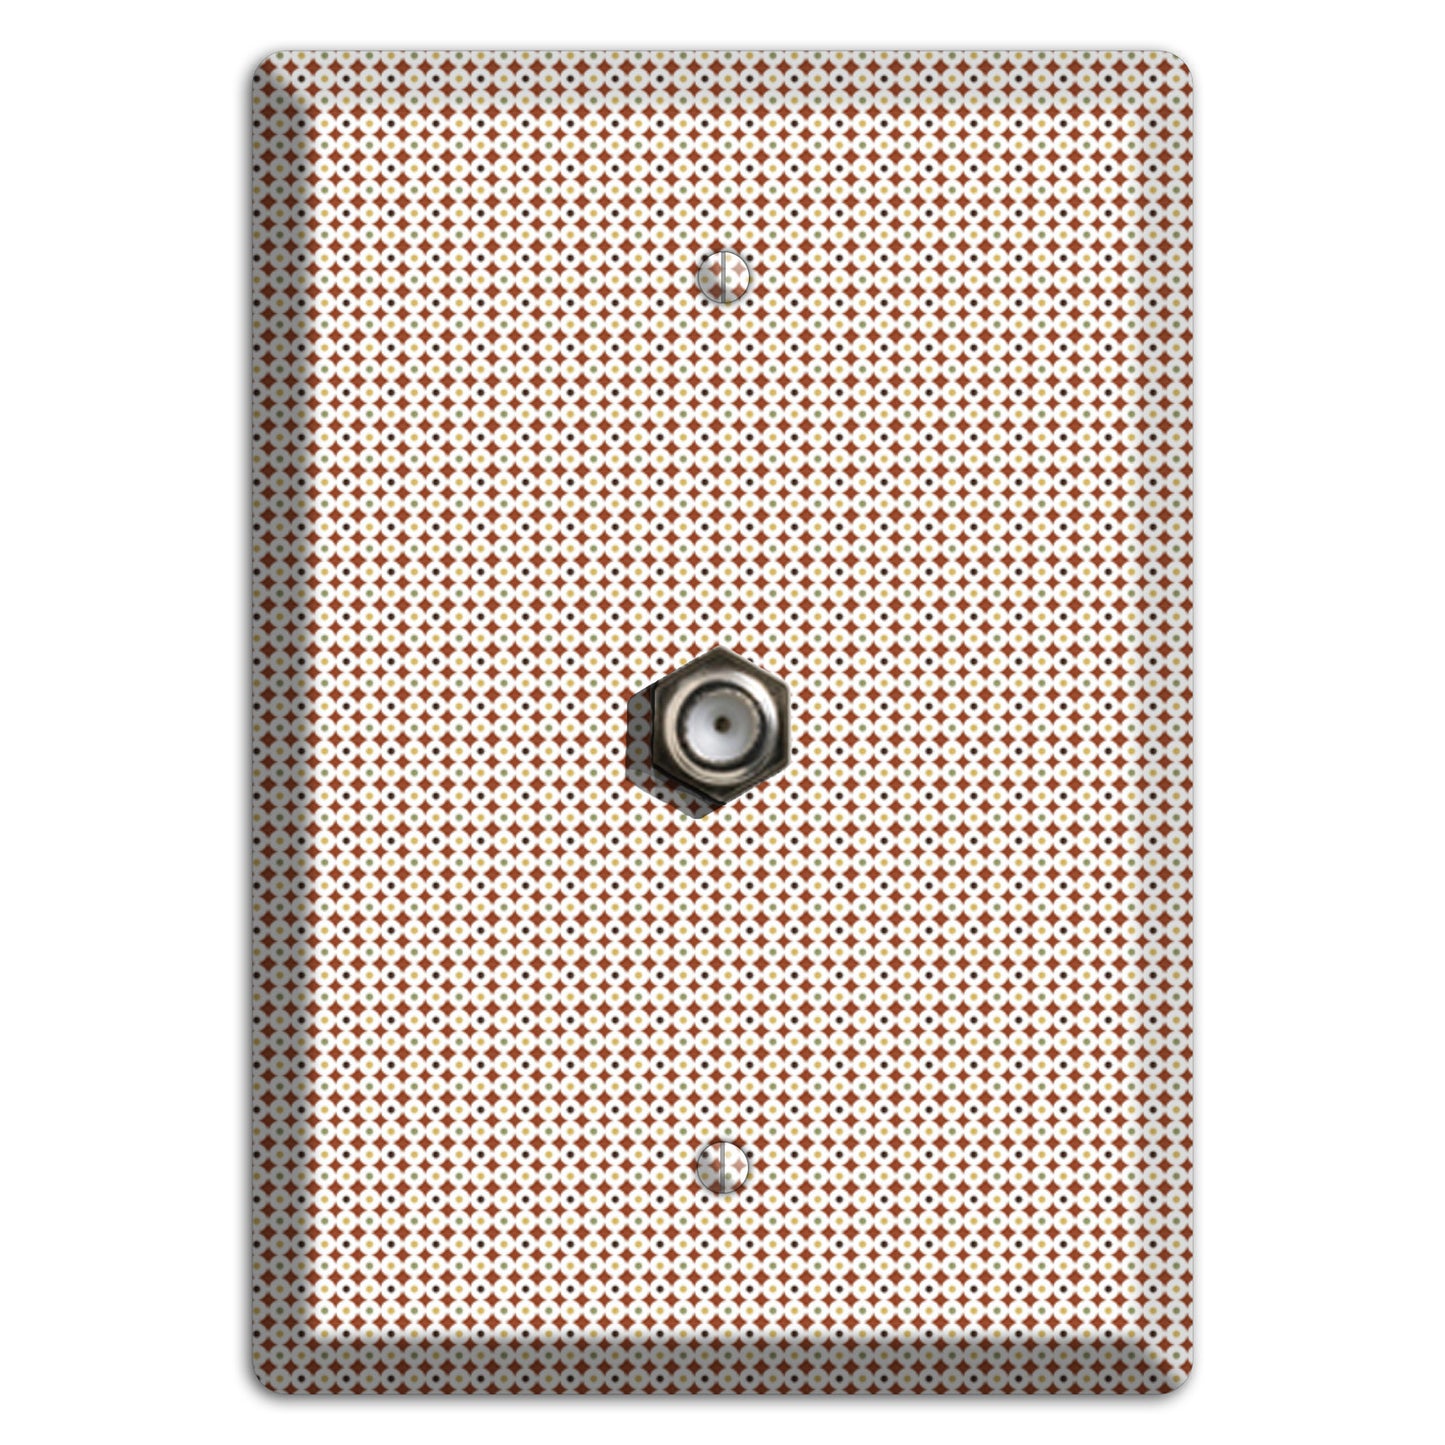 Beige Weave Cable Wallplate